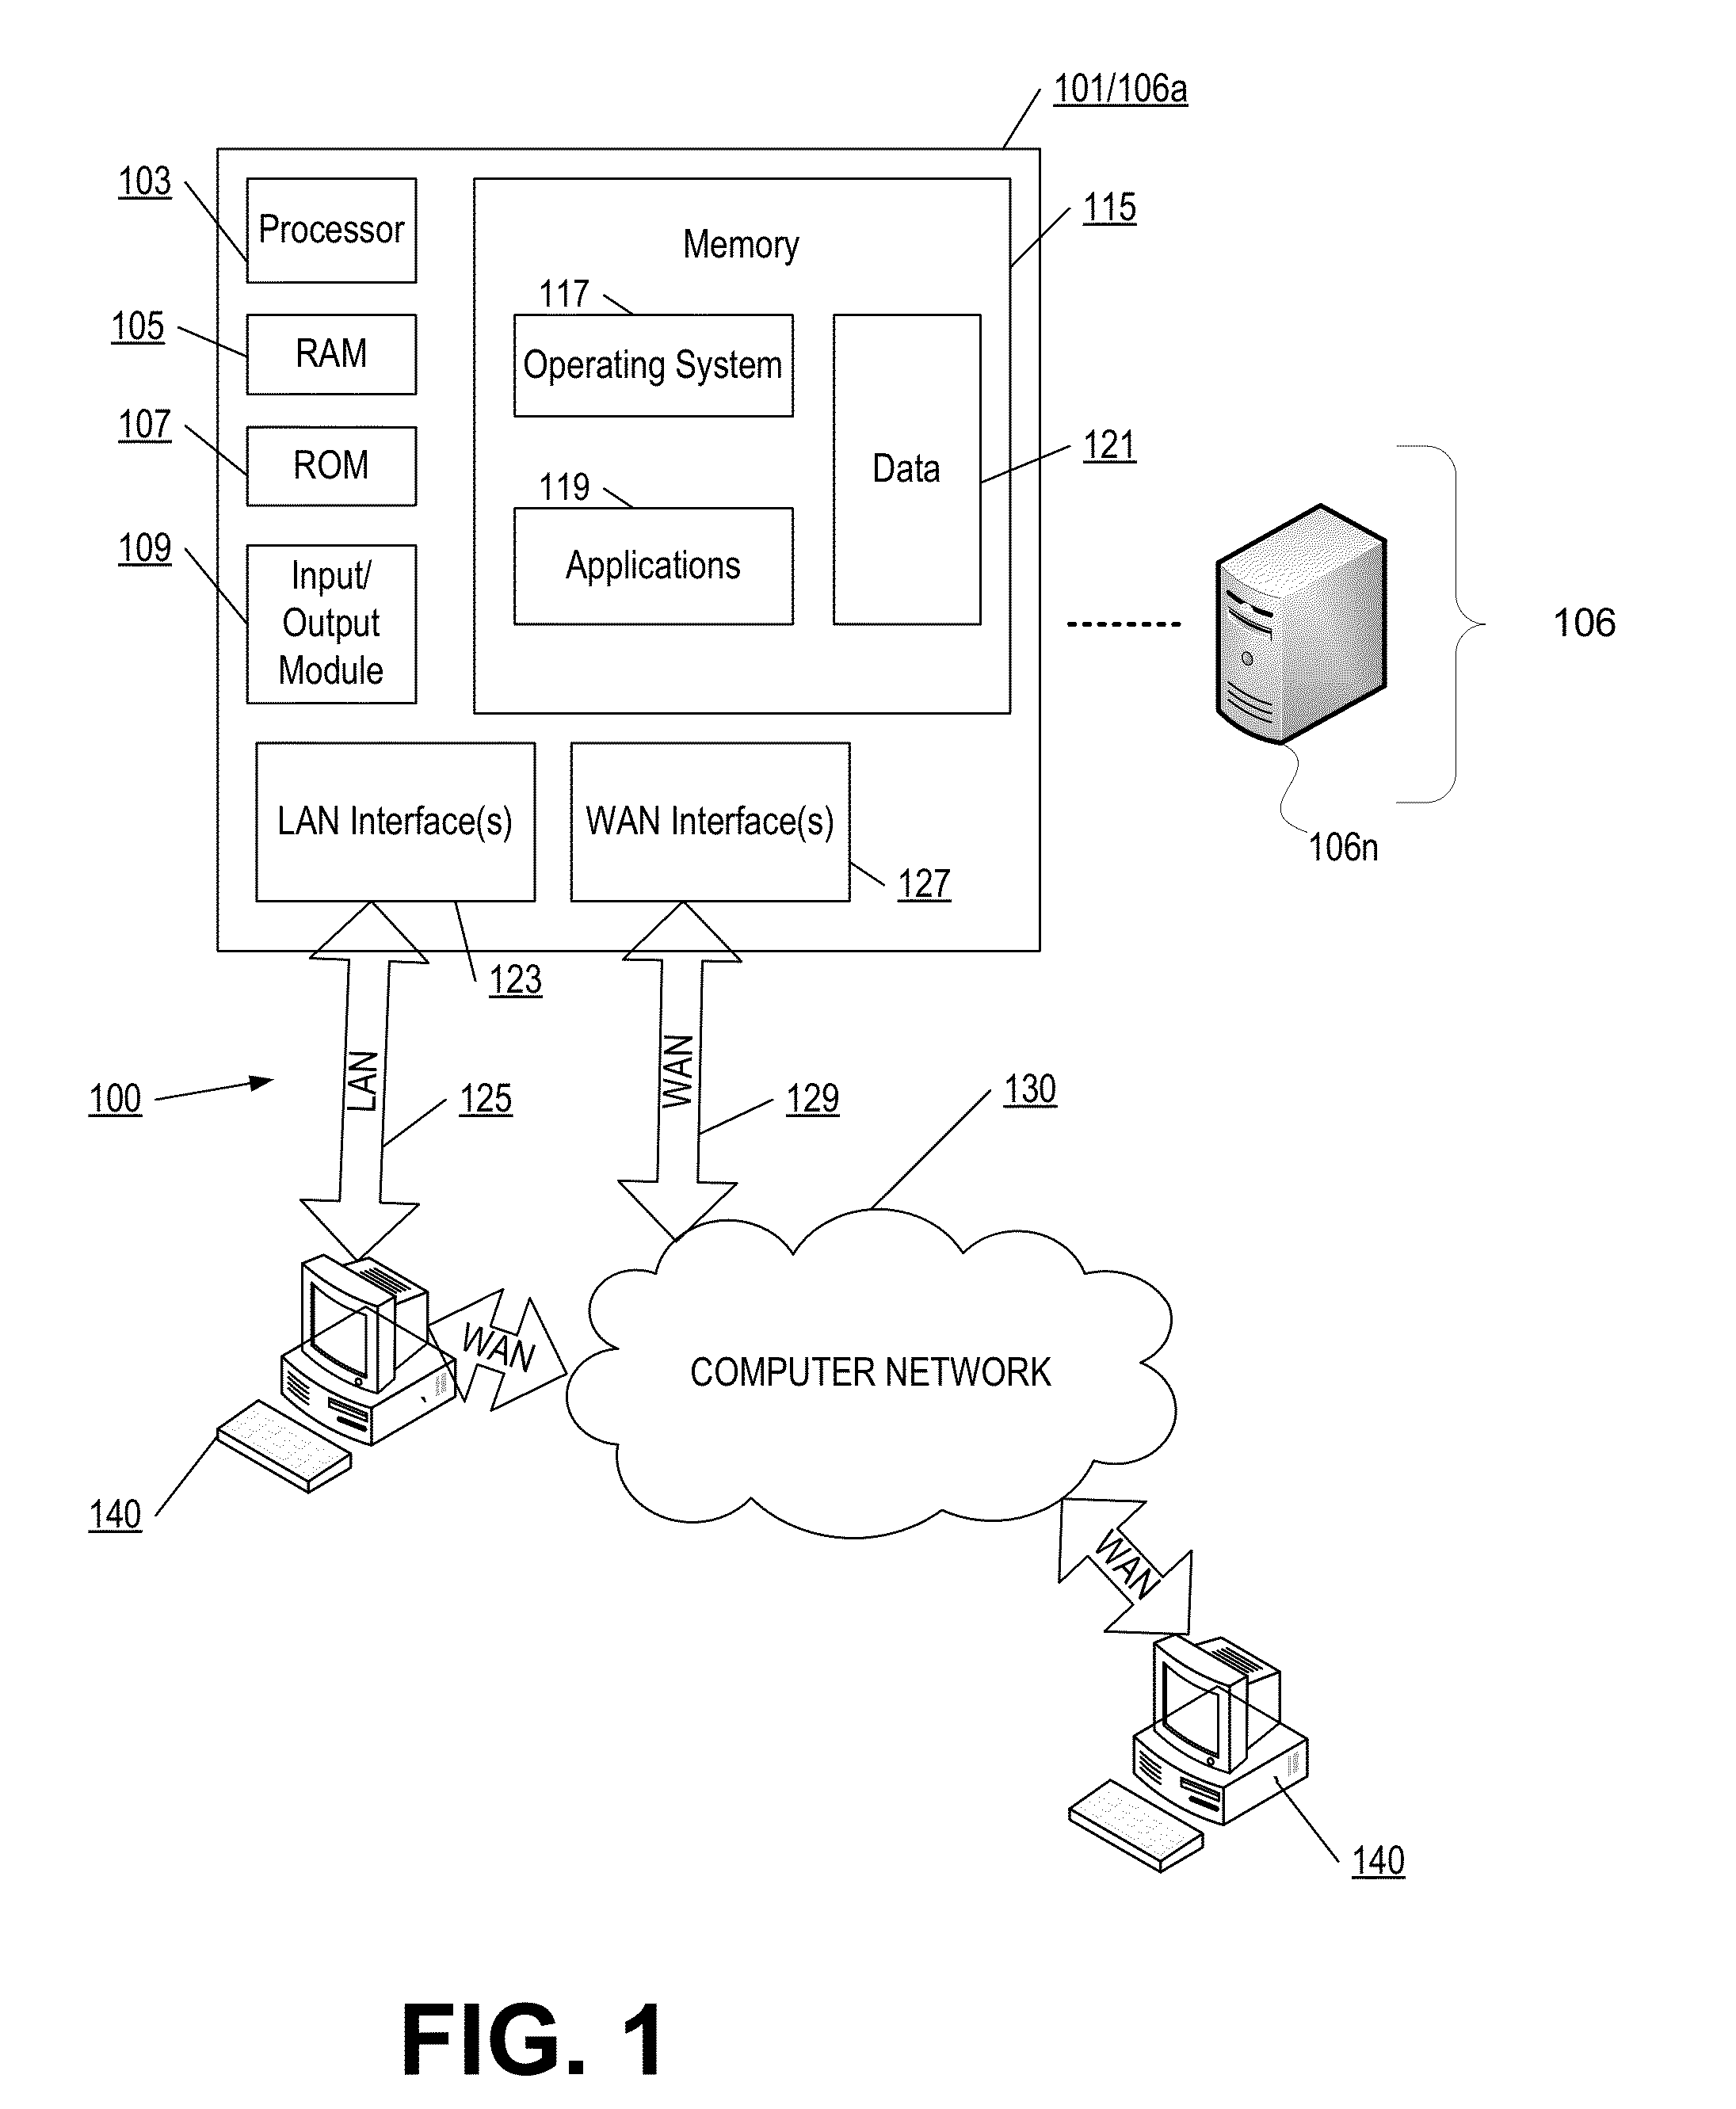 Methods and Systems for Evaluating Historical Metrics in Selecting a Physical Host for Execution of a Virtual Machine